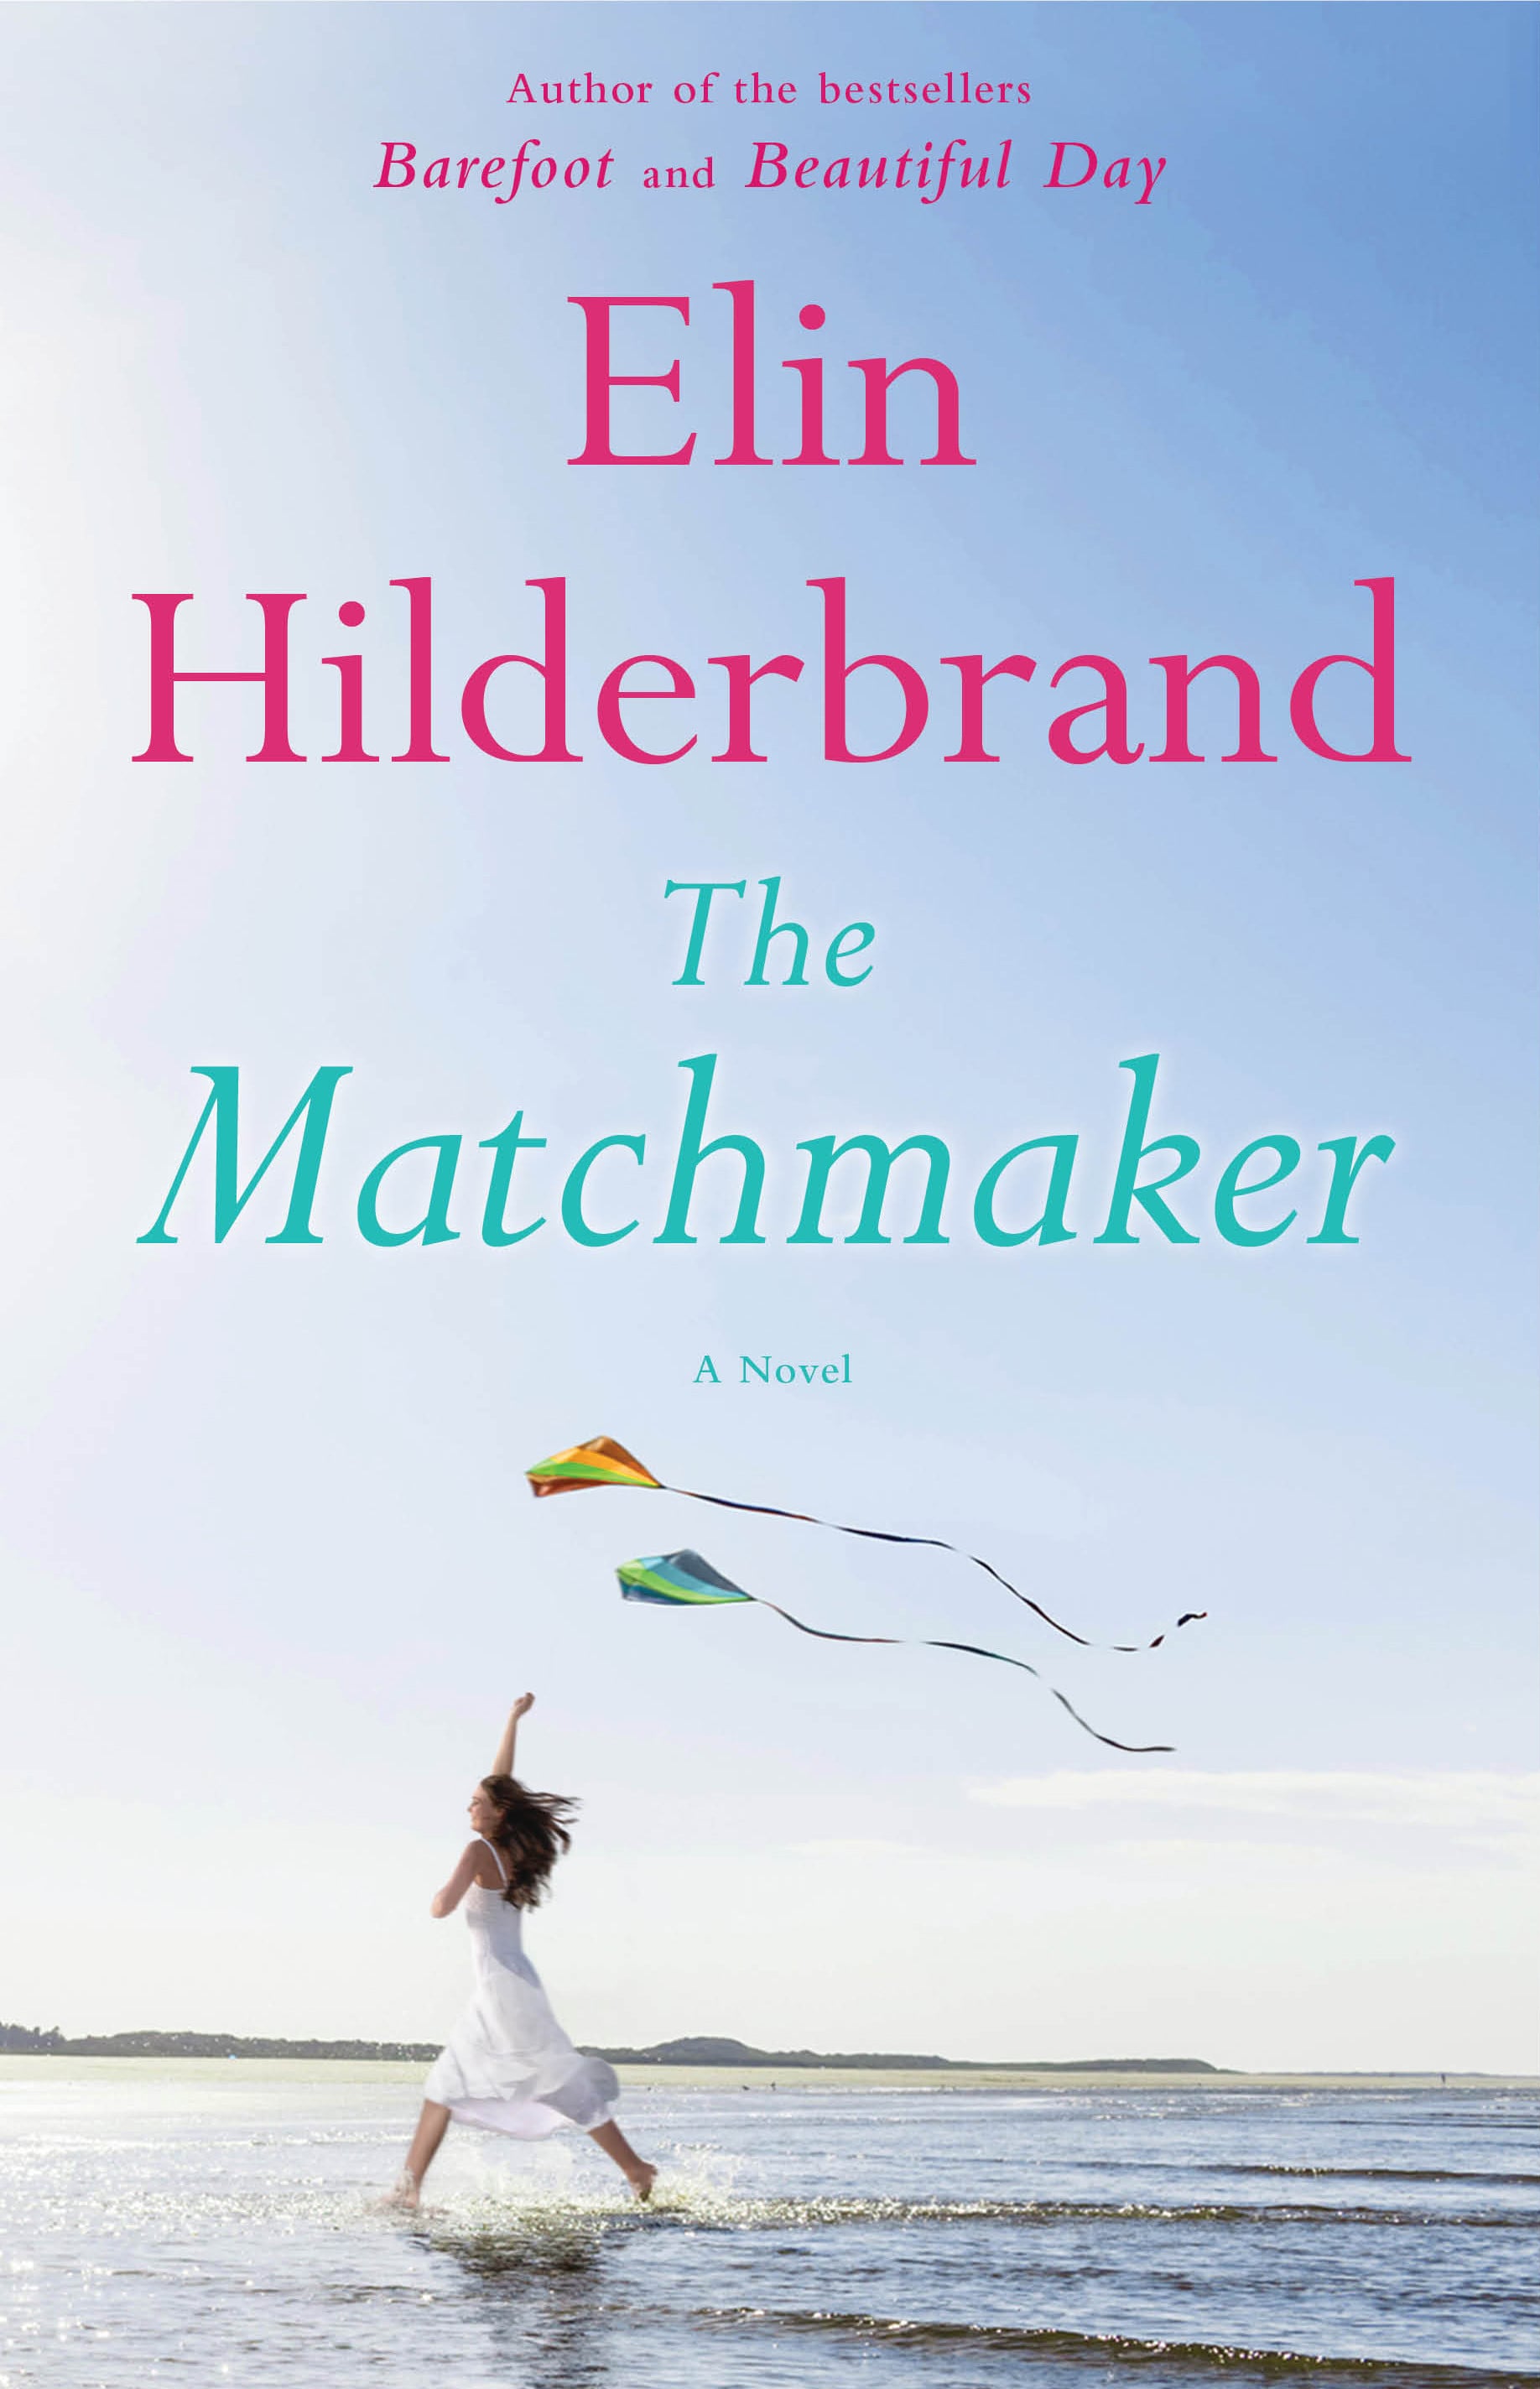 The Matchmaker | Catch Up on the Best Books of 2014 | POPSUGAR Love & Sex